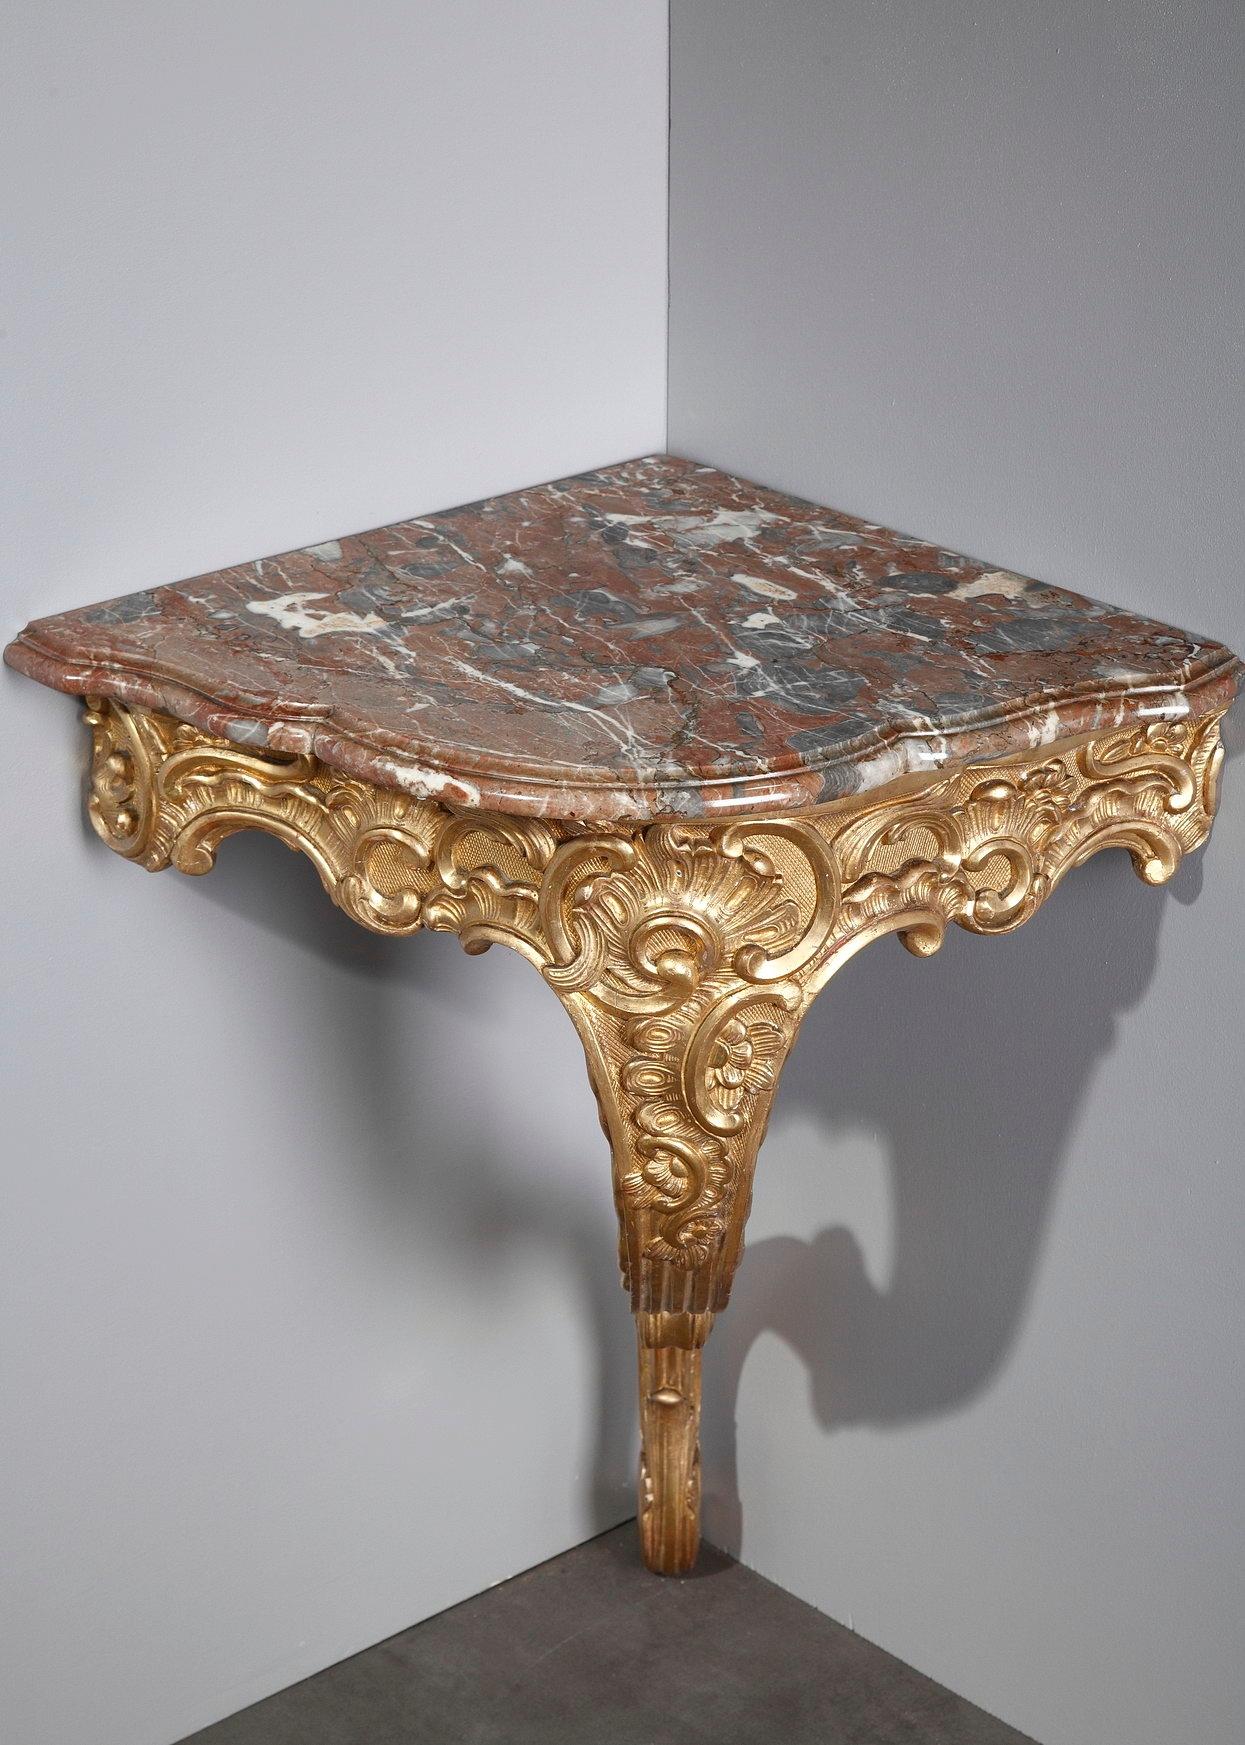 Two Rococo style giltwood corner consoles, carved with naturalistic, voluptuous flowing foliage and scrolls. The console table reached the height of fashion in France during the Louis XV period. The design of the foot and the belt alternates curves